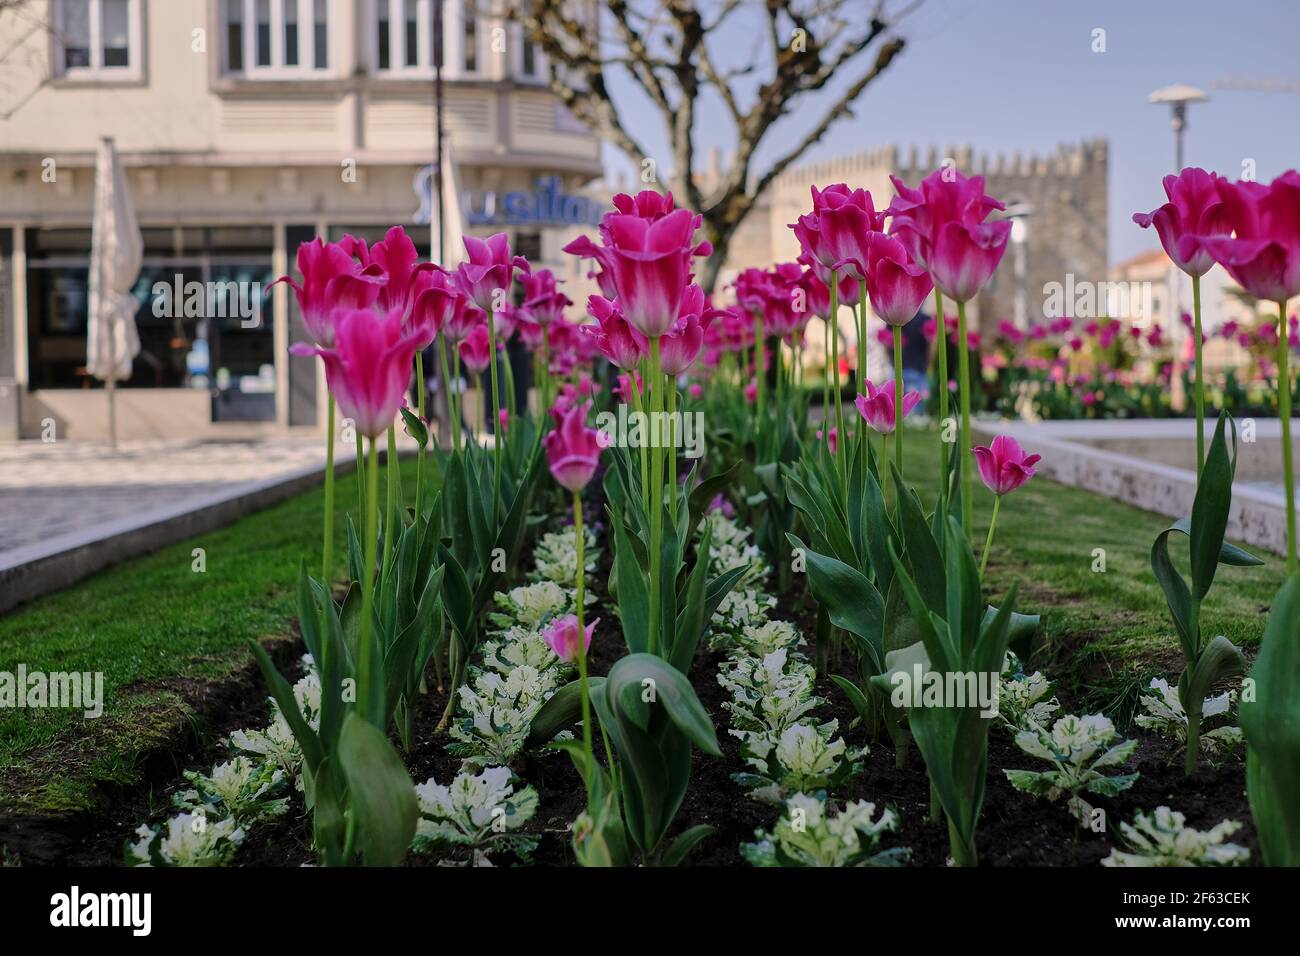 urban garden showing a flower bed with pink tulips, aligned and well organized, photo taken on a beautiful sunny day in European spring. Stock Photo